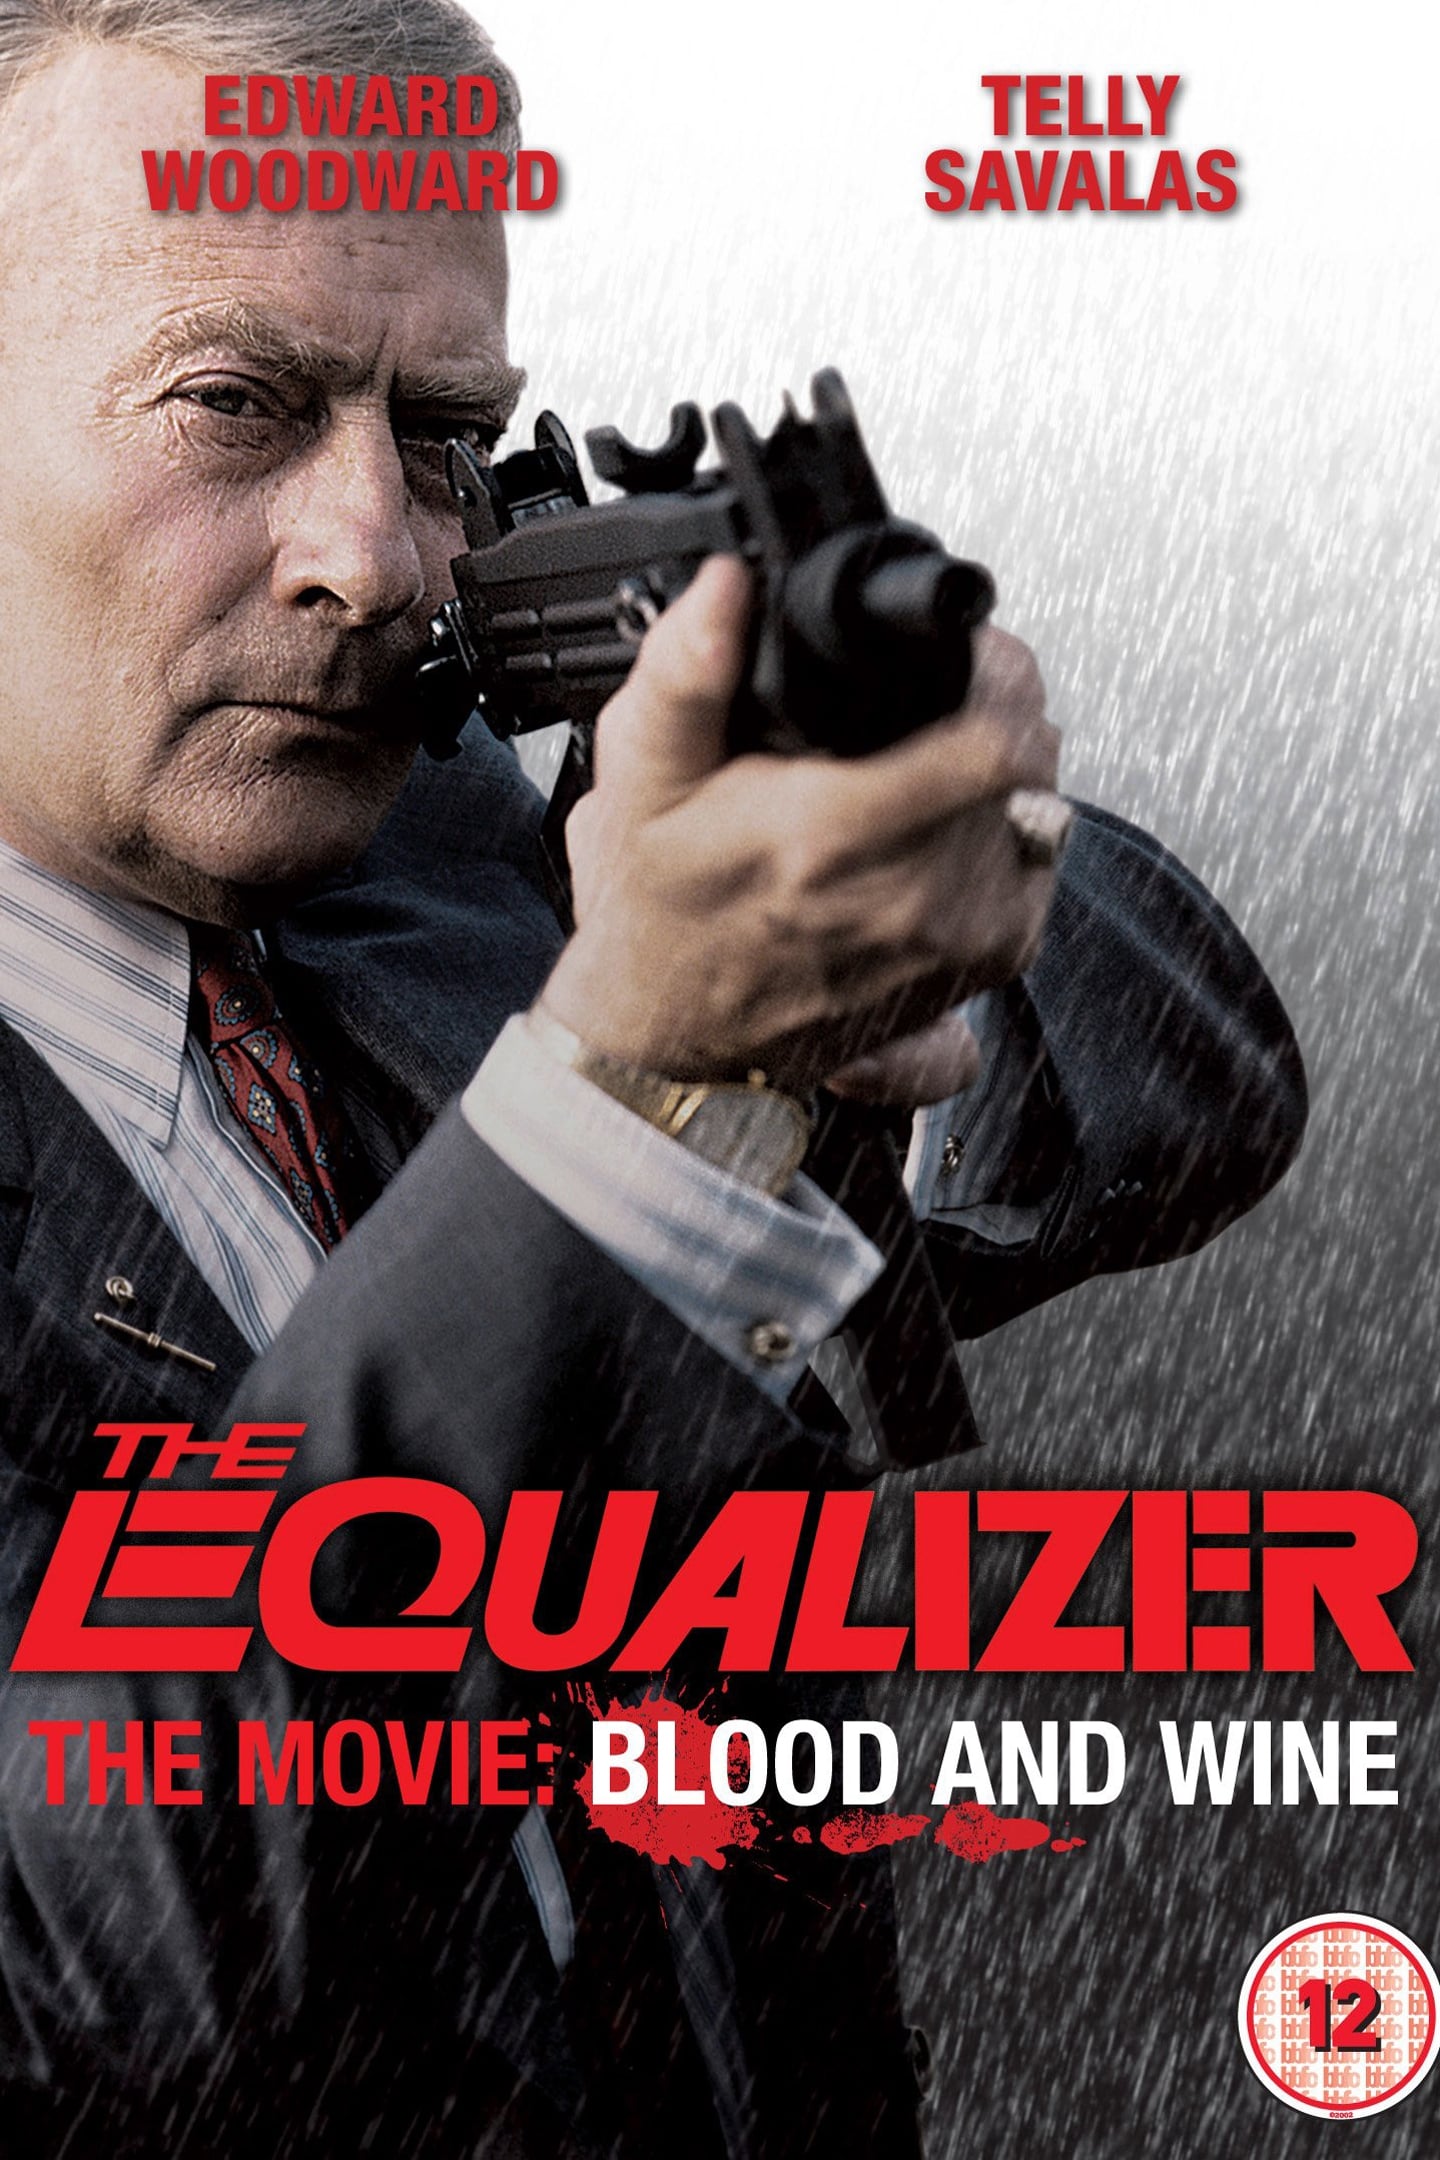 The Equalizer - The Movie: Blood & Wine (1987)